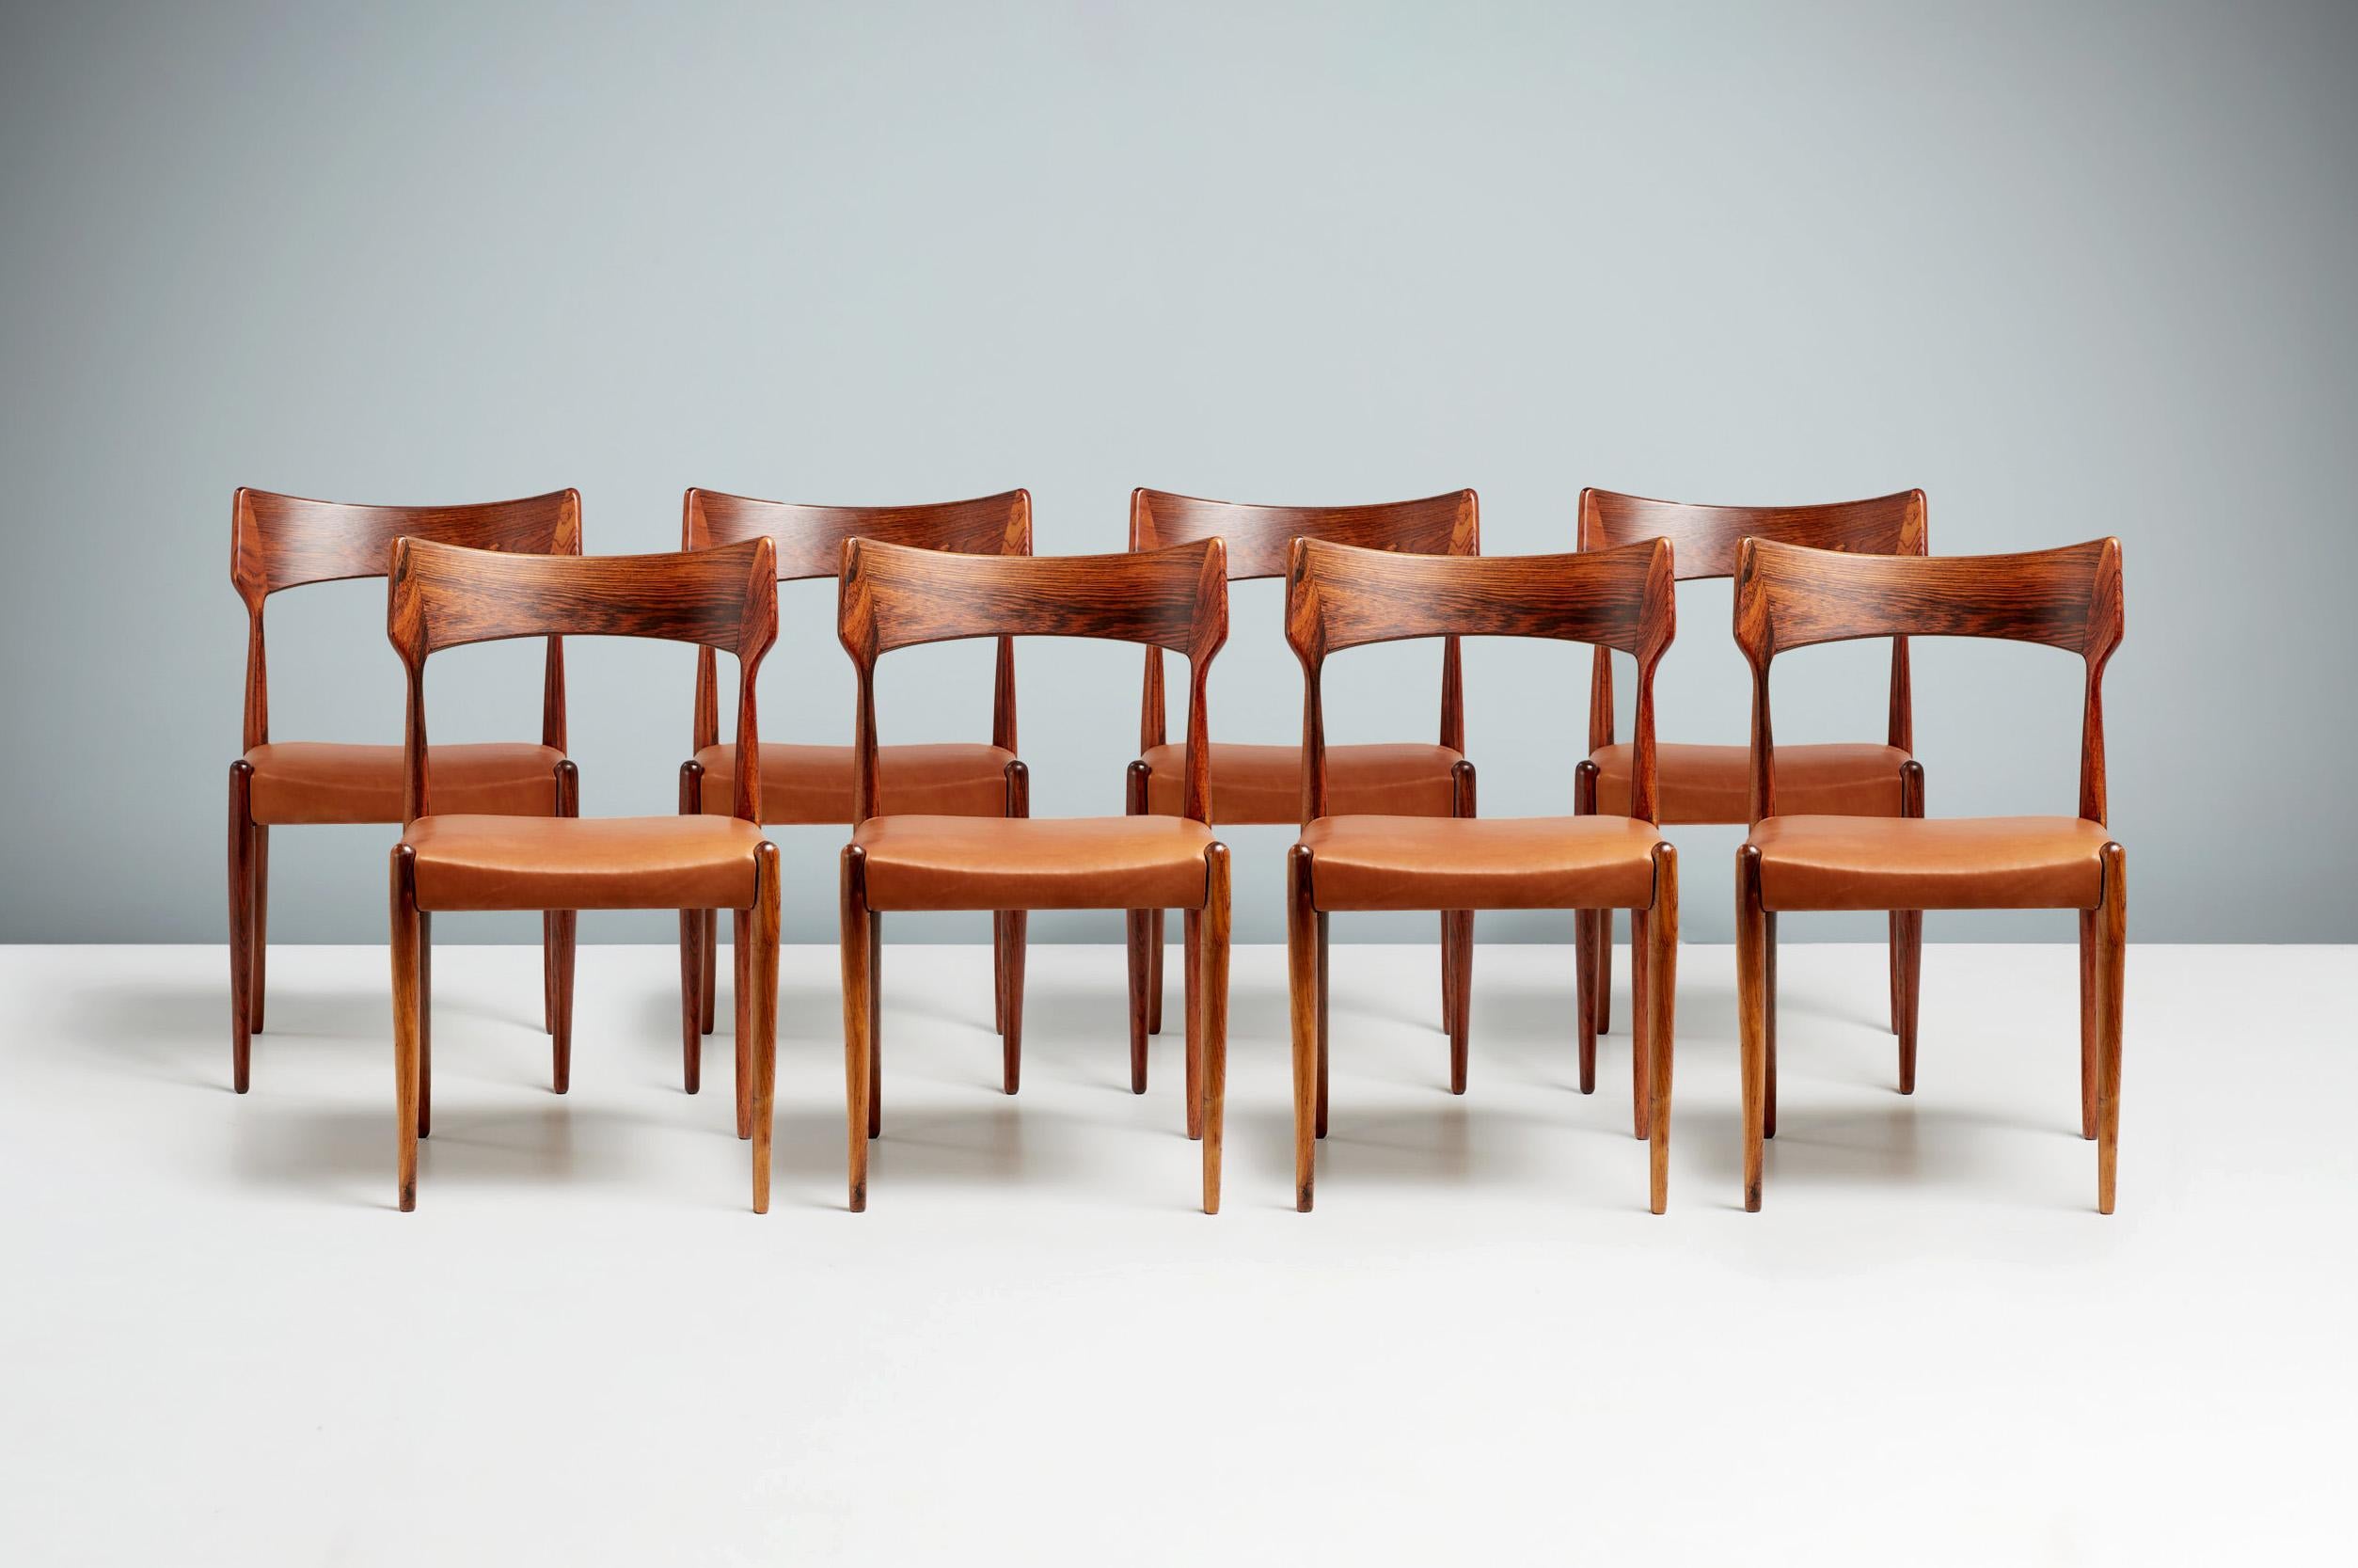 Bernard Petersen - Dining Chairs, circa 1960.

Set of 8 rosewood dining chairs produced by Christian Linnebergs Møbelfabrik, Denmark and designed by Bernard Petersen. The seats have been reupholstered in premium, aniline cognac brown leather and the